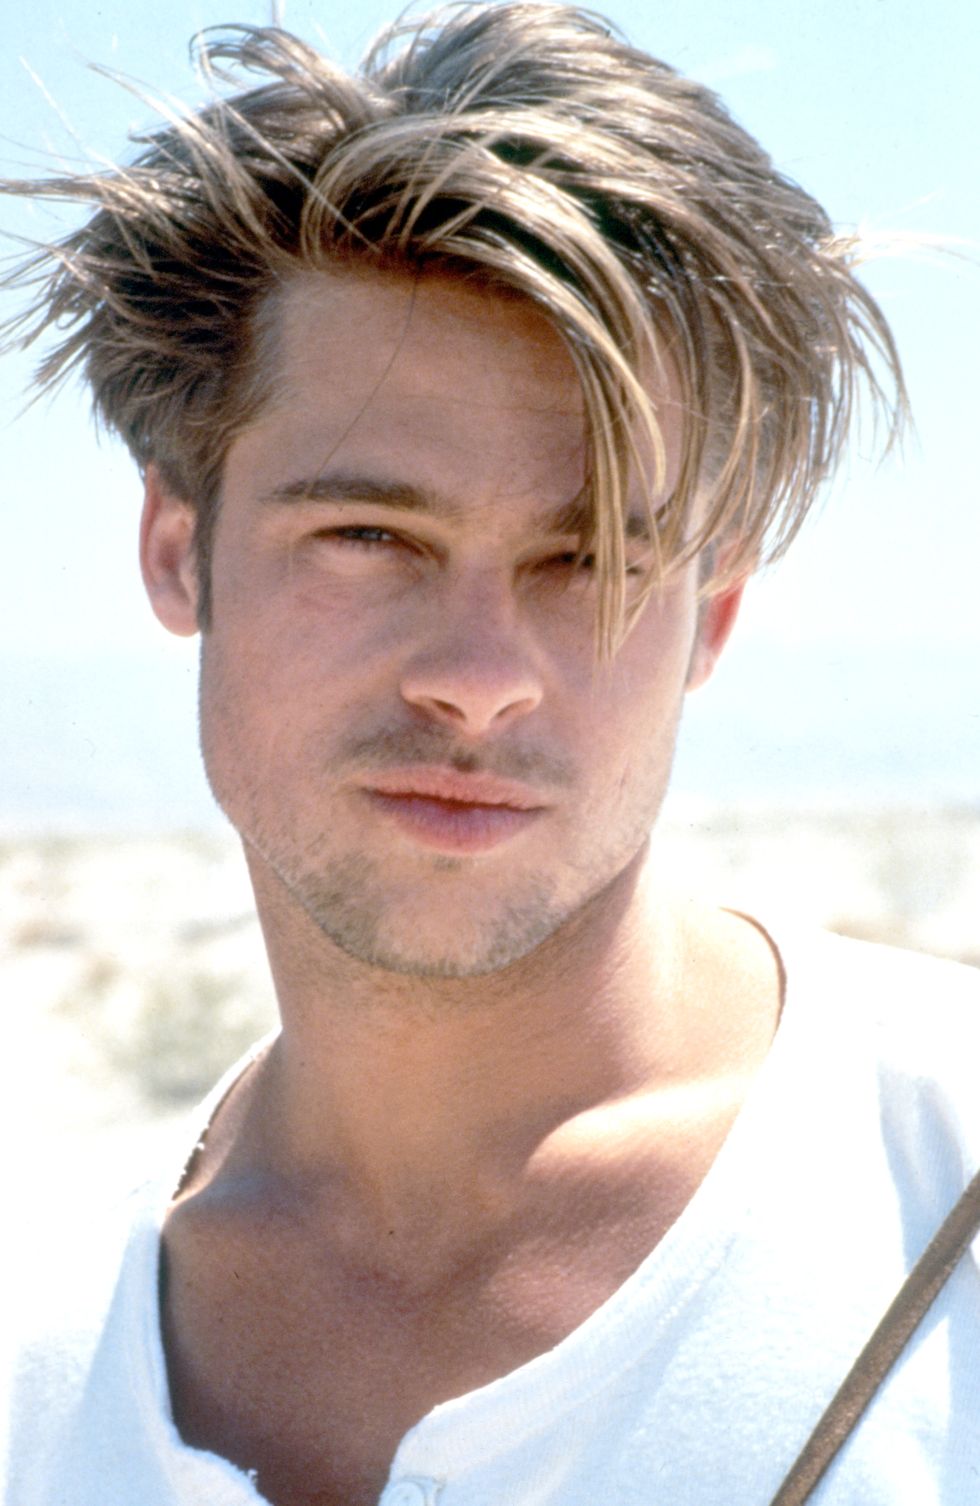 actor brad pitt in his modelling days in the early 1990s photo by iain mckellyavalongetty images